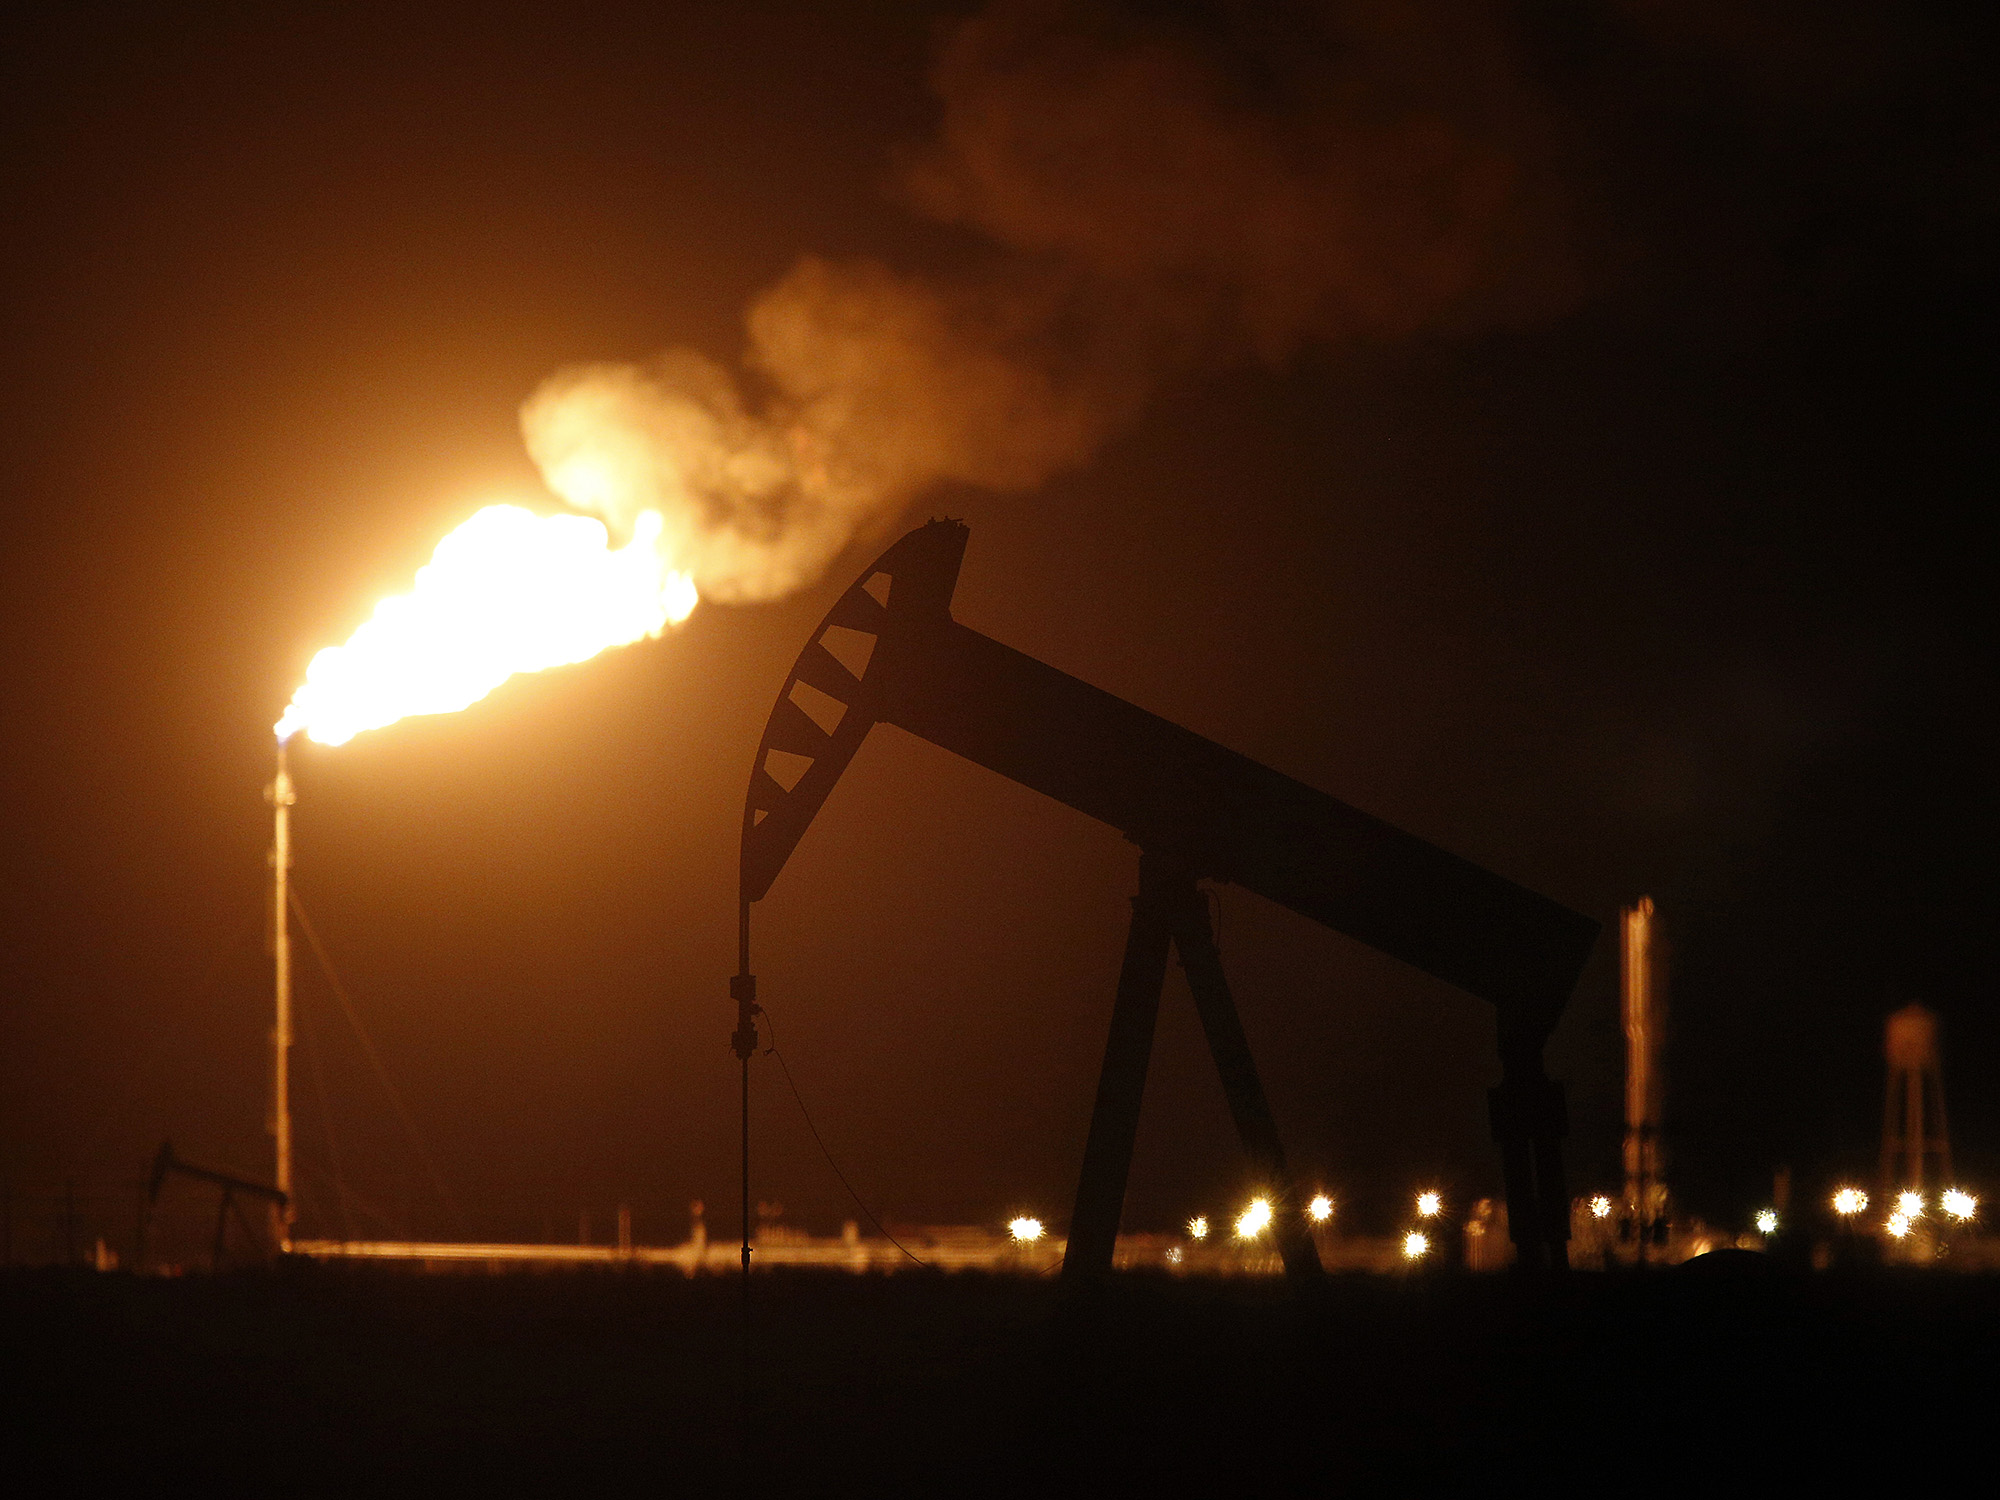 The silhouette of an electric oil pump jack is seen near a flare at night in the oil fields surrounding Midland, Texas.